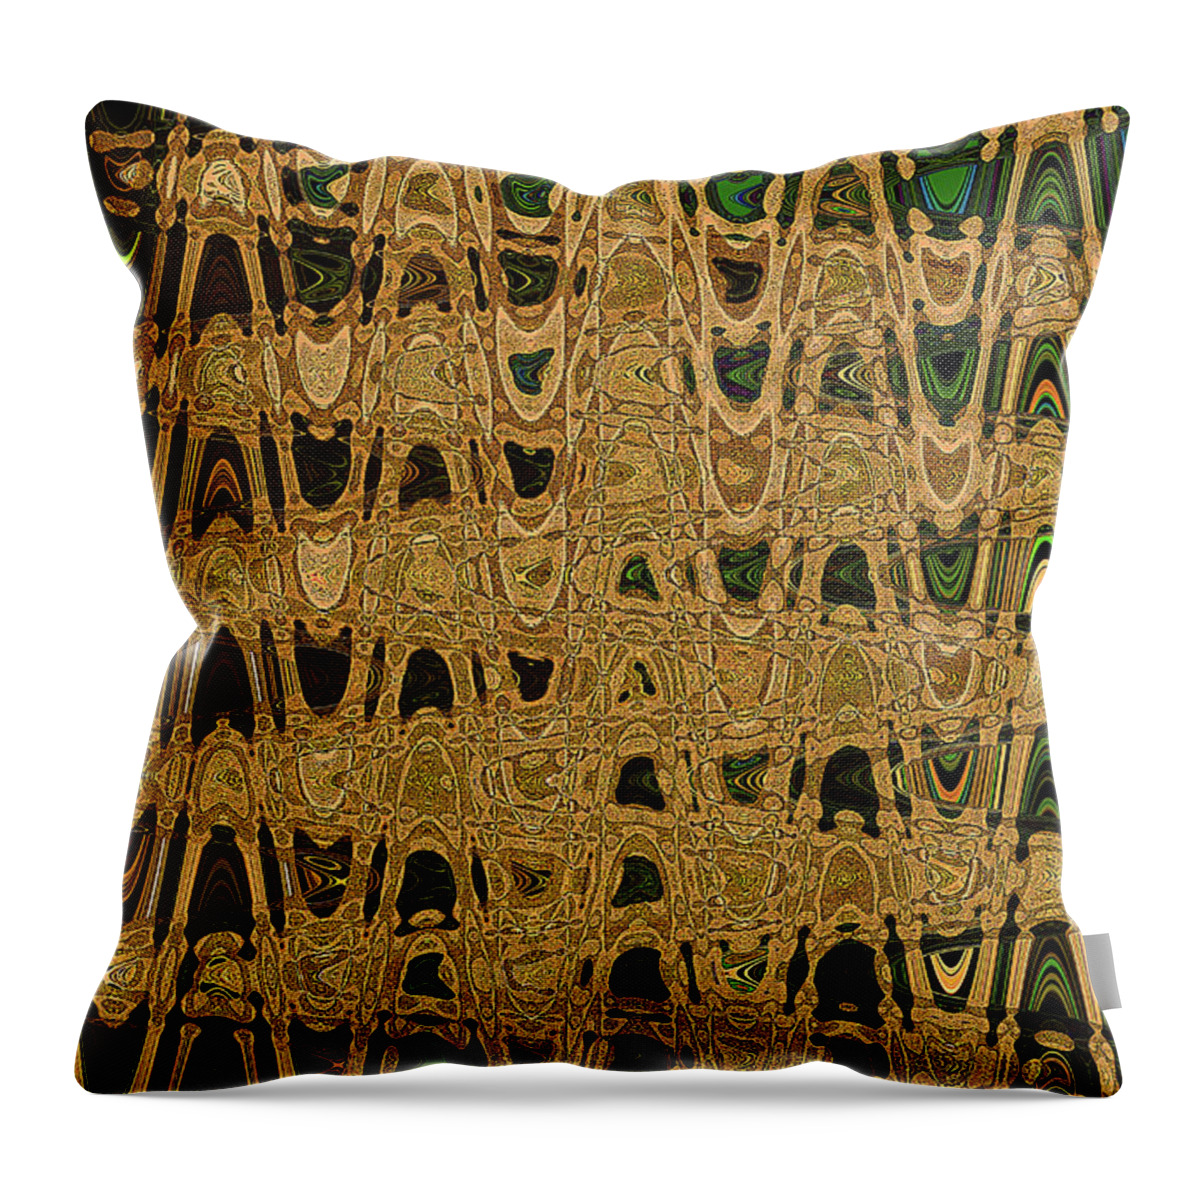 Brown Wave Frequency Abstract Throw Pillow featuring the digital art Brown Wave Frequency Abstract by Tom Janca